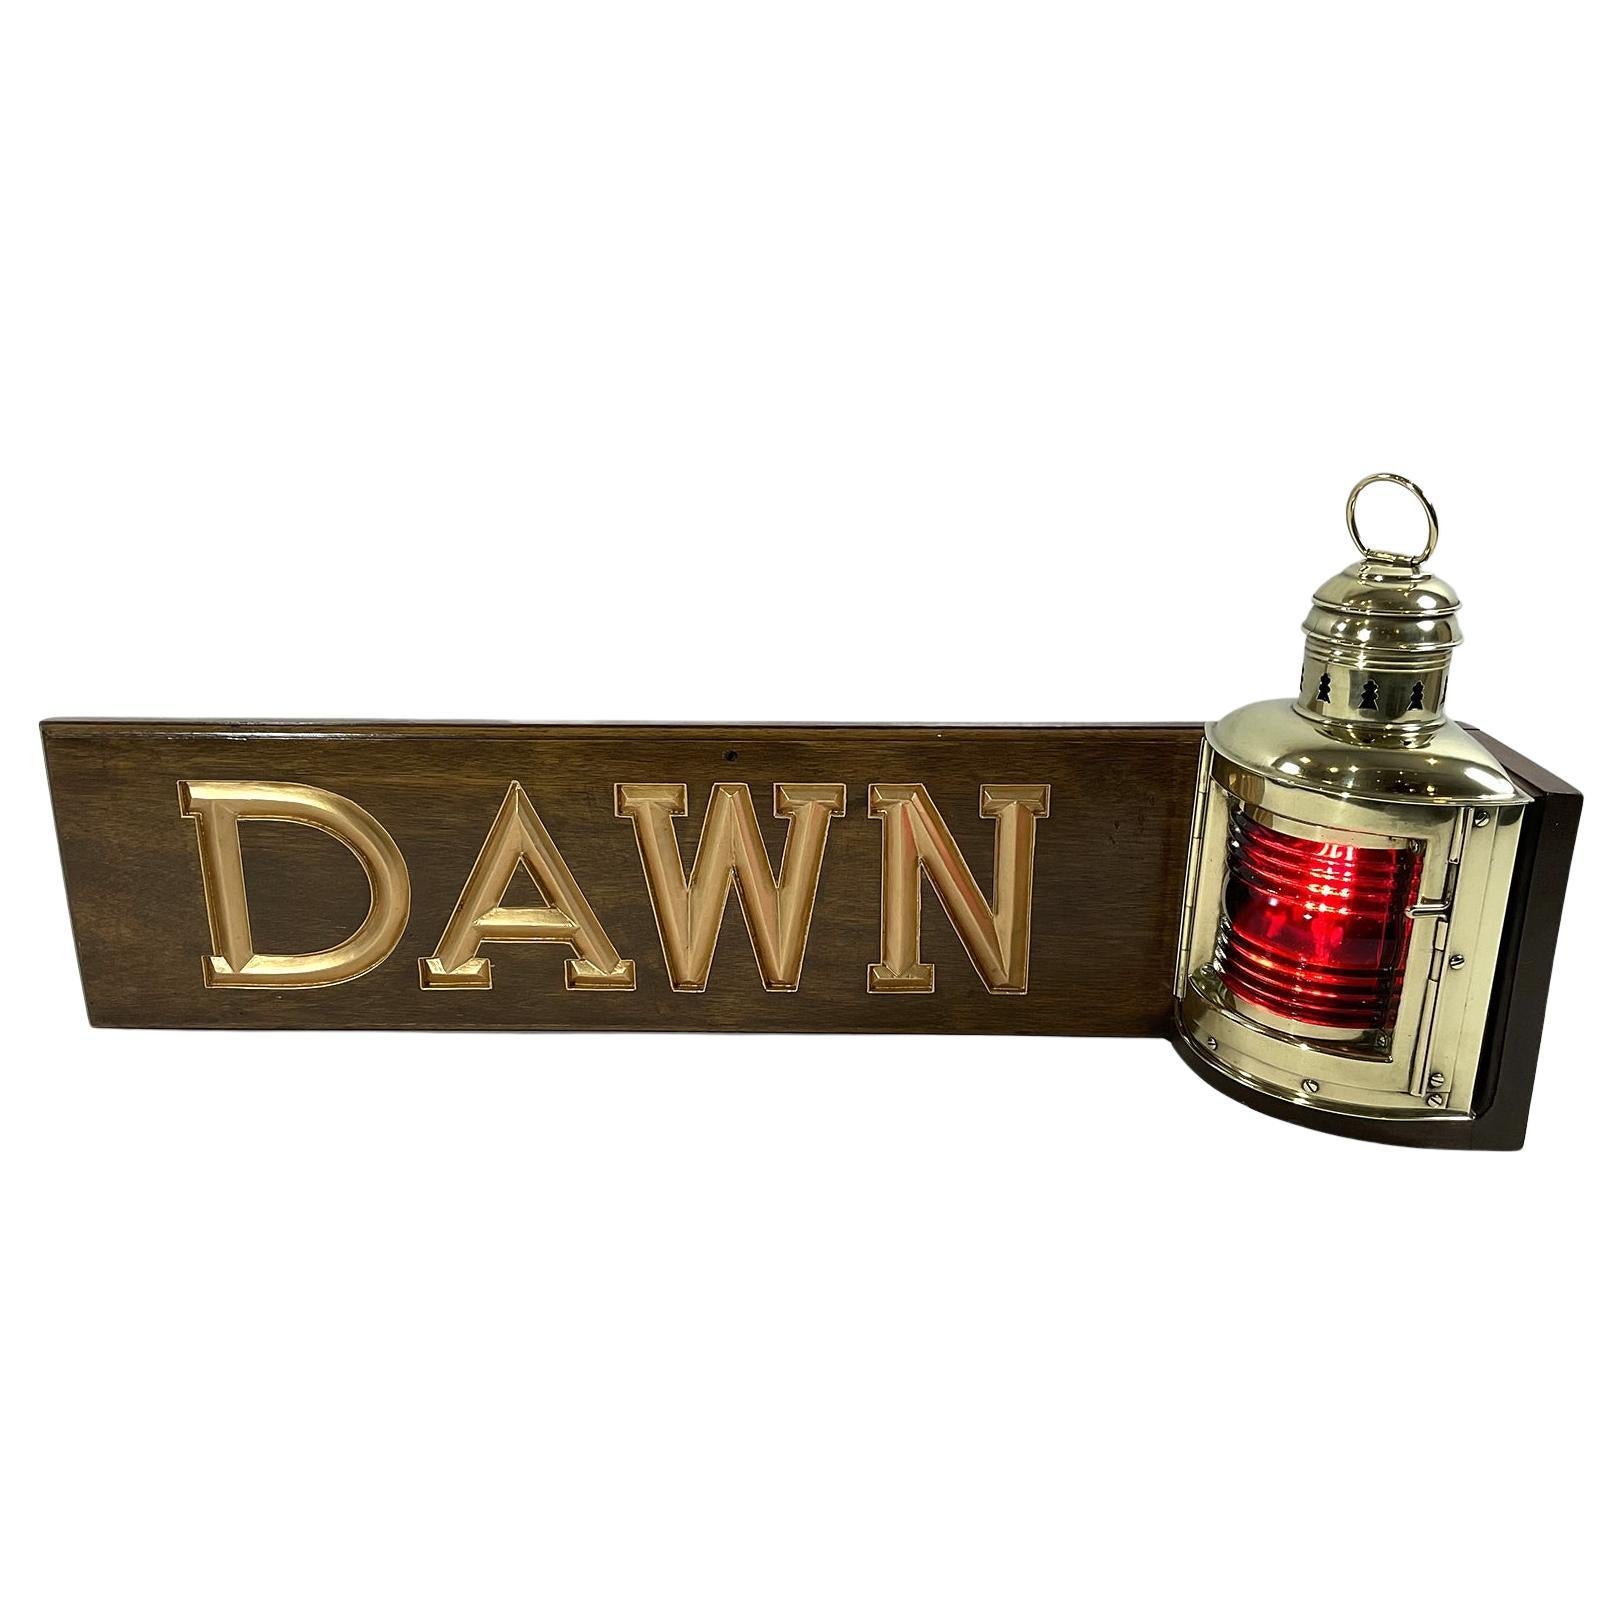 Ship Lantern with Nameboard "Dawn" For Sale